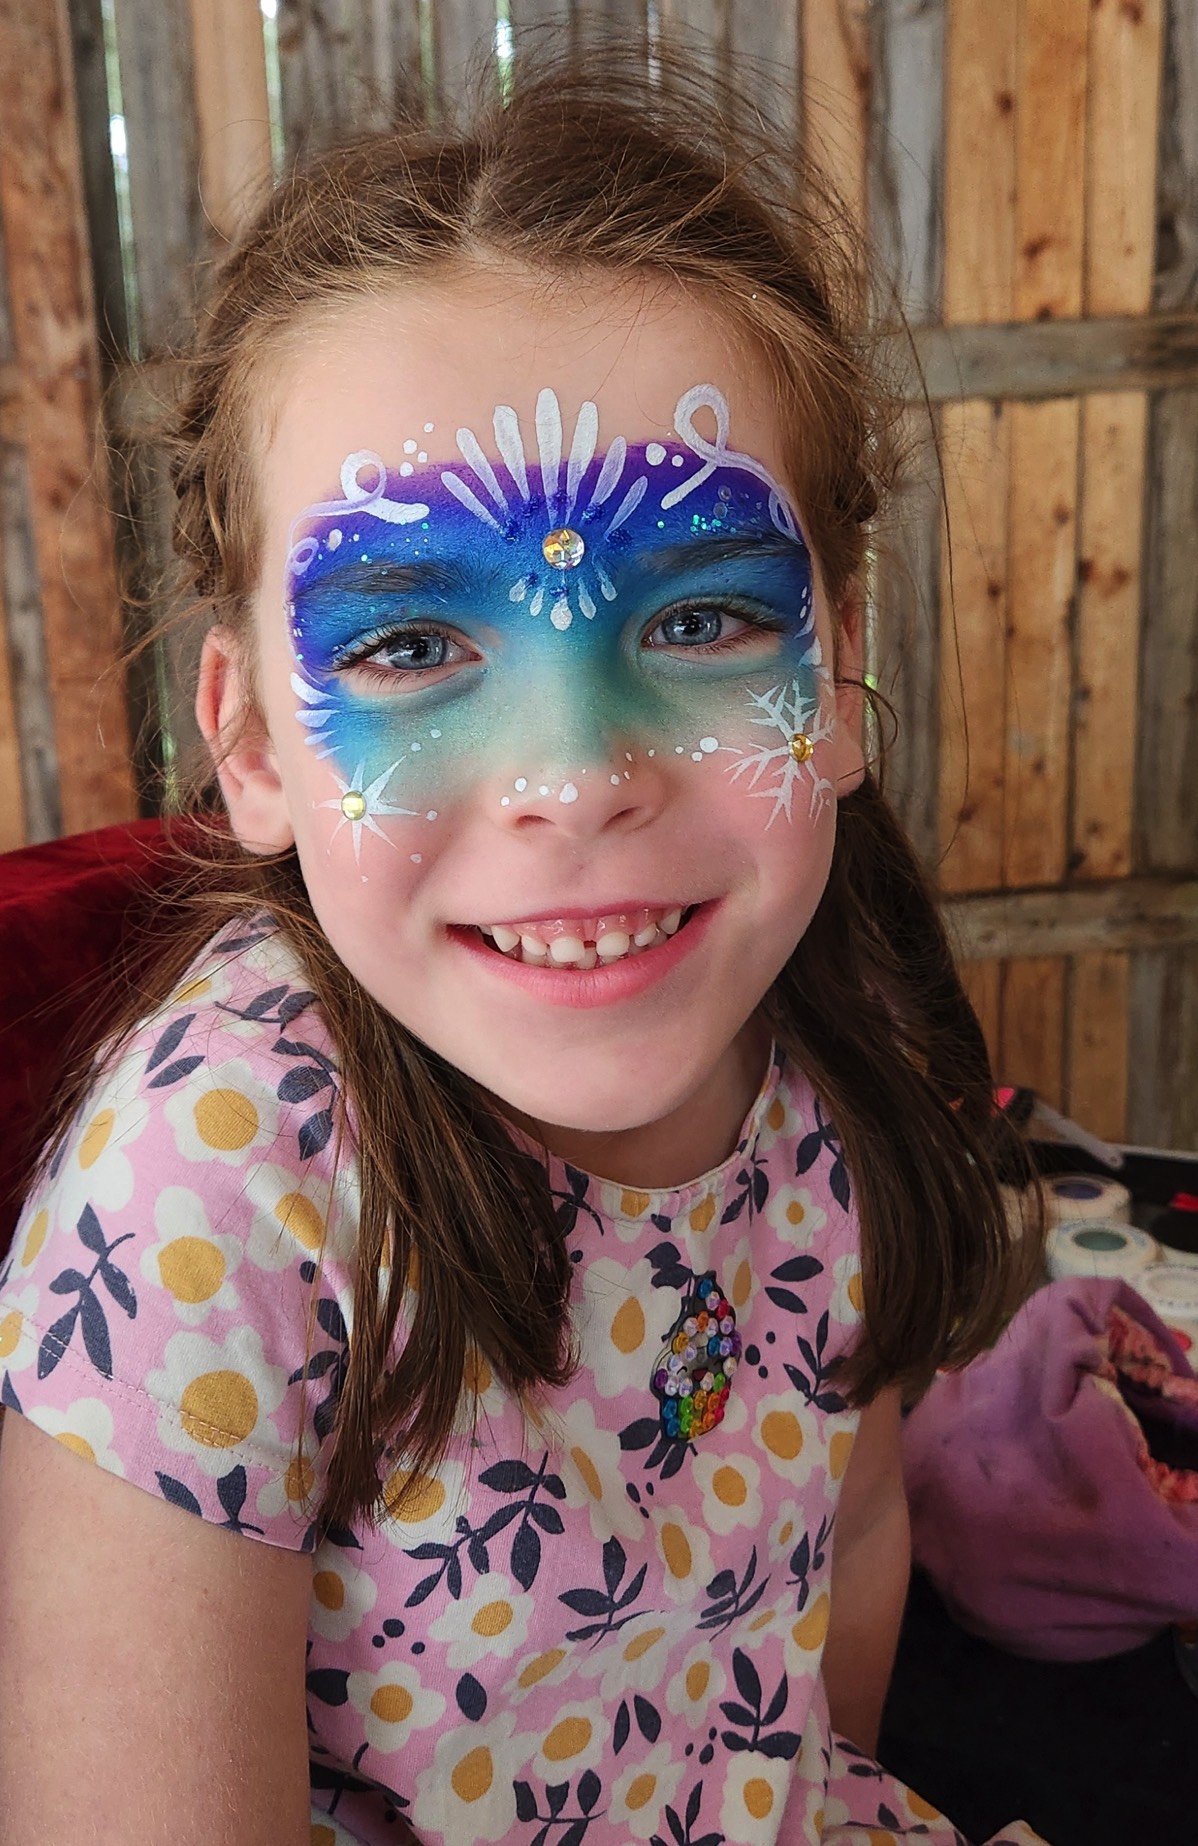 Eye can see a Rainbow!  Eye face painting, Face painting designs